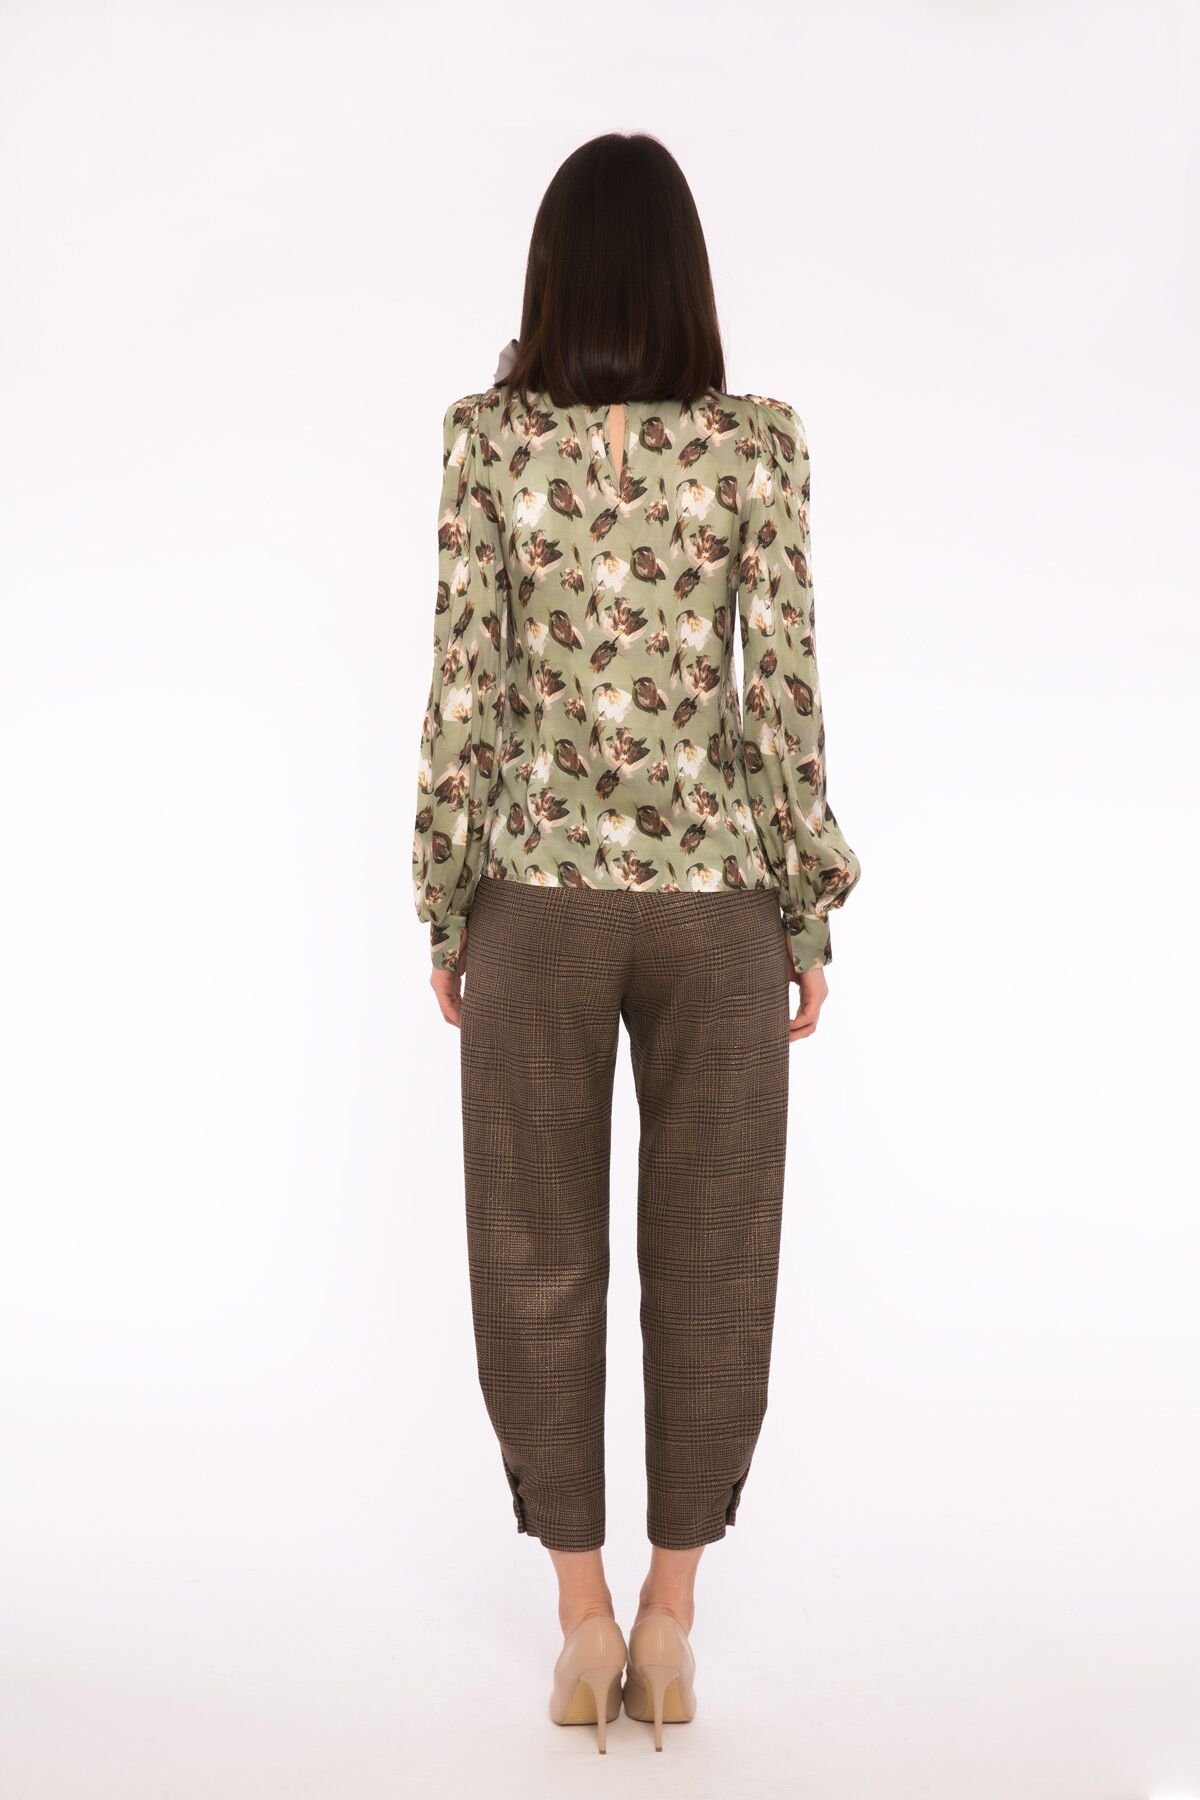 Contrast Detailed Stand Up Collar Floral Pattern Flowy Green Blouse